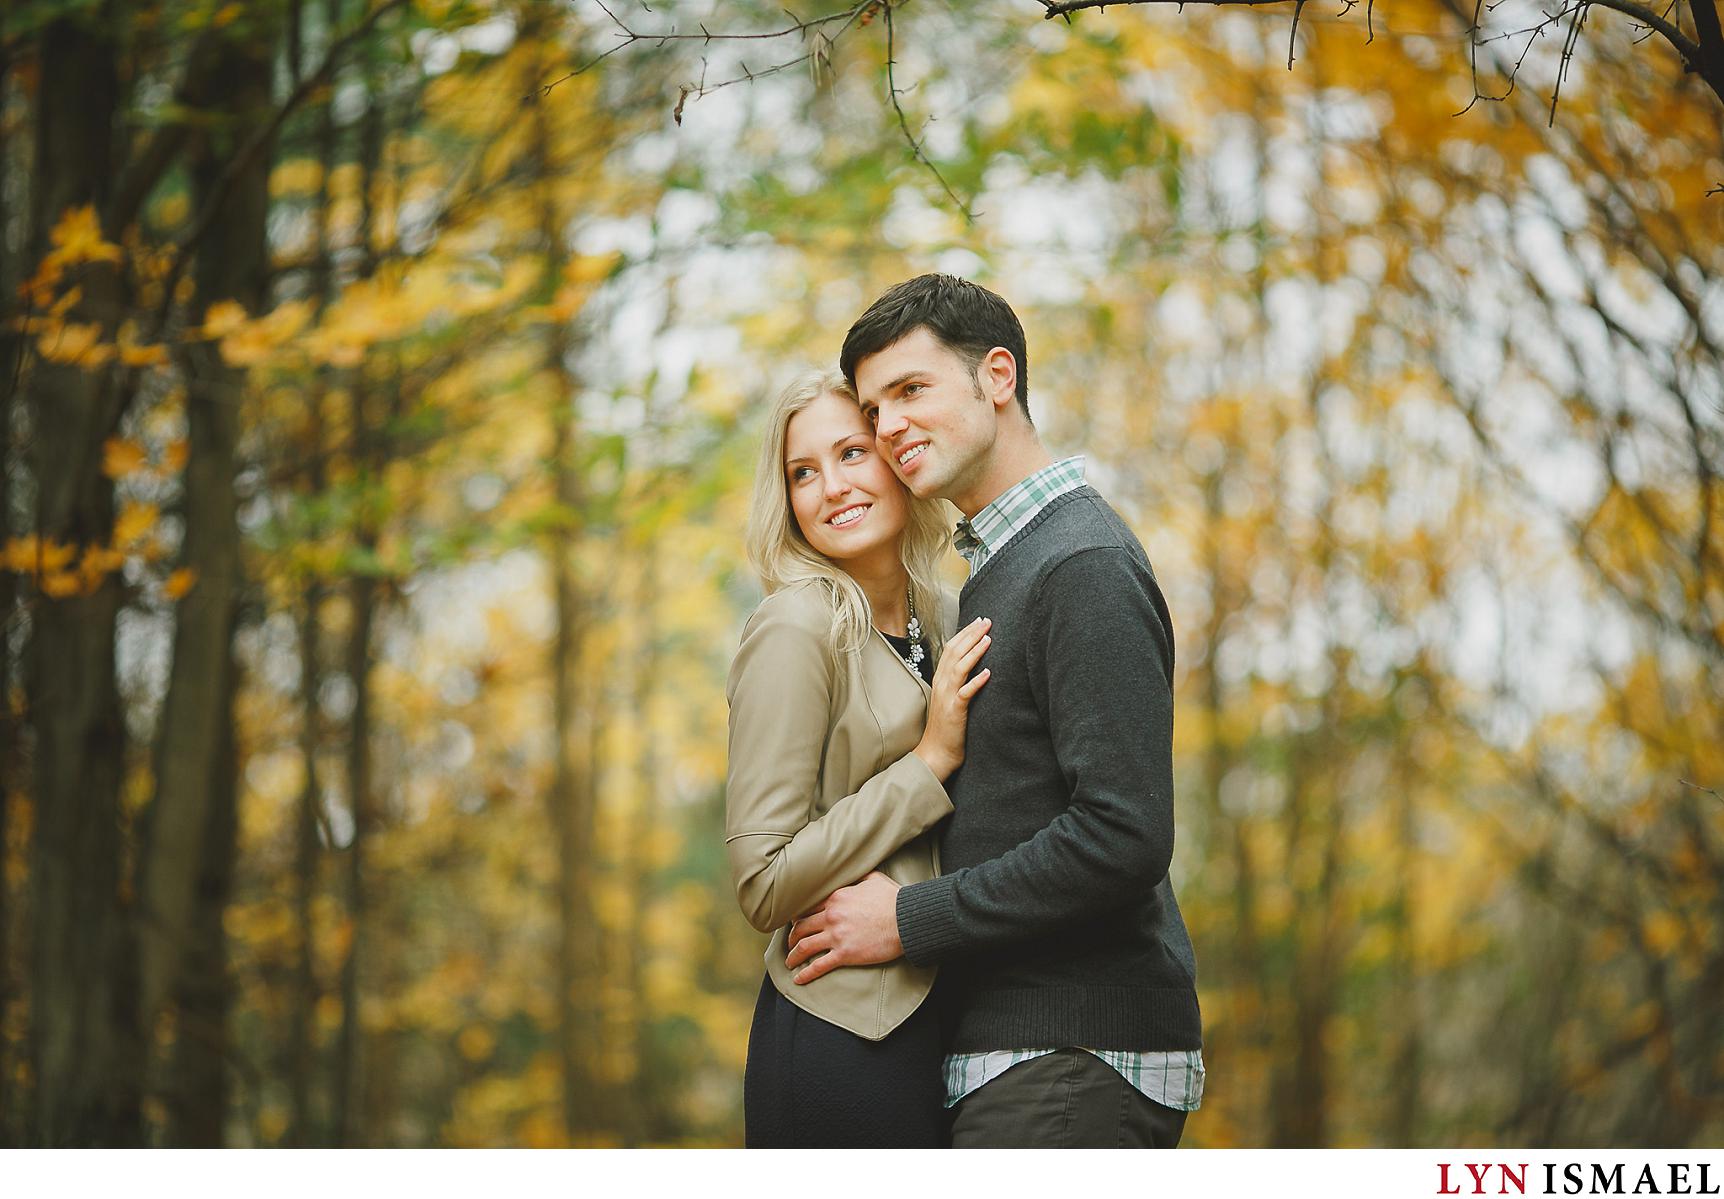 A portrait of an engaged couple taken in the fall